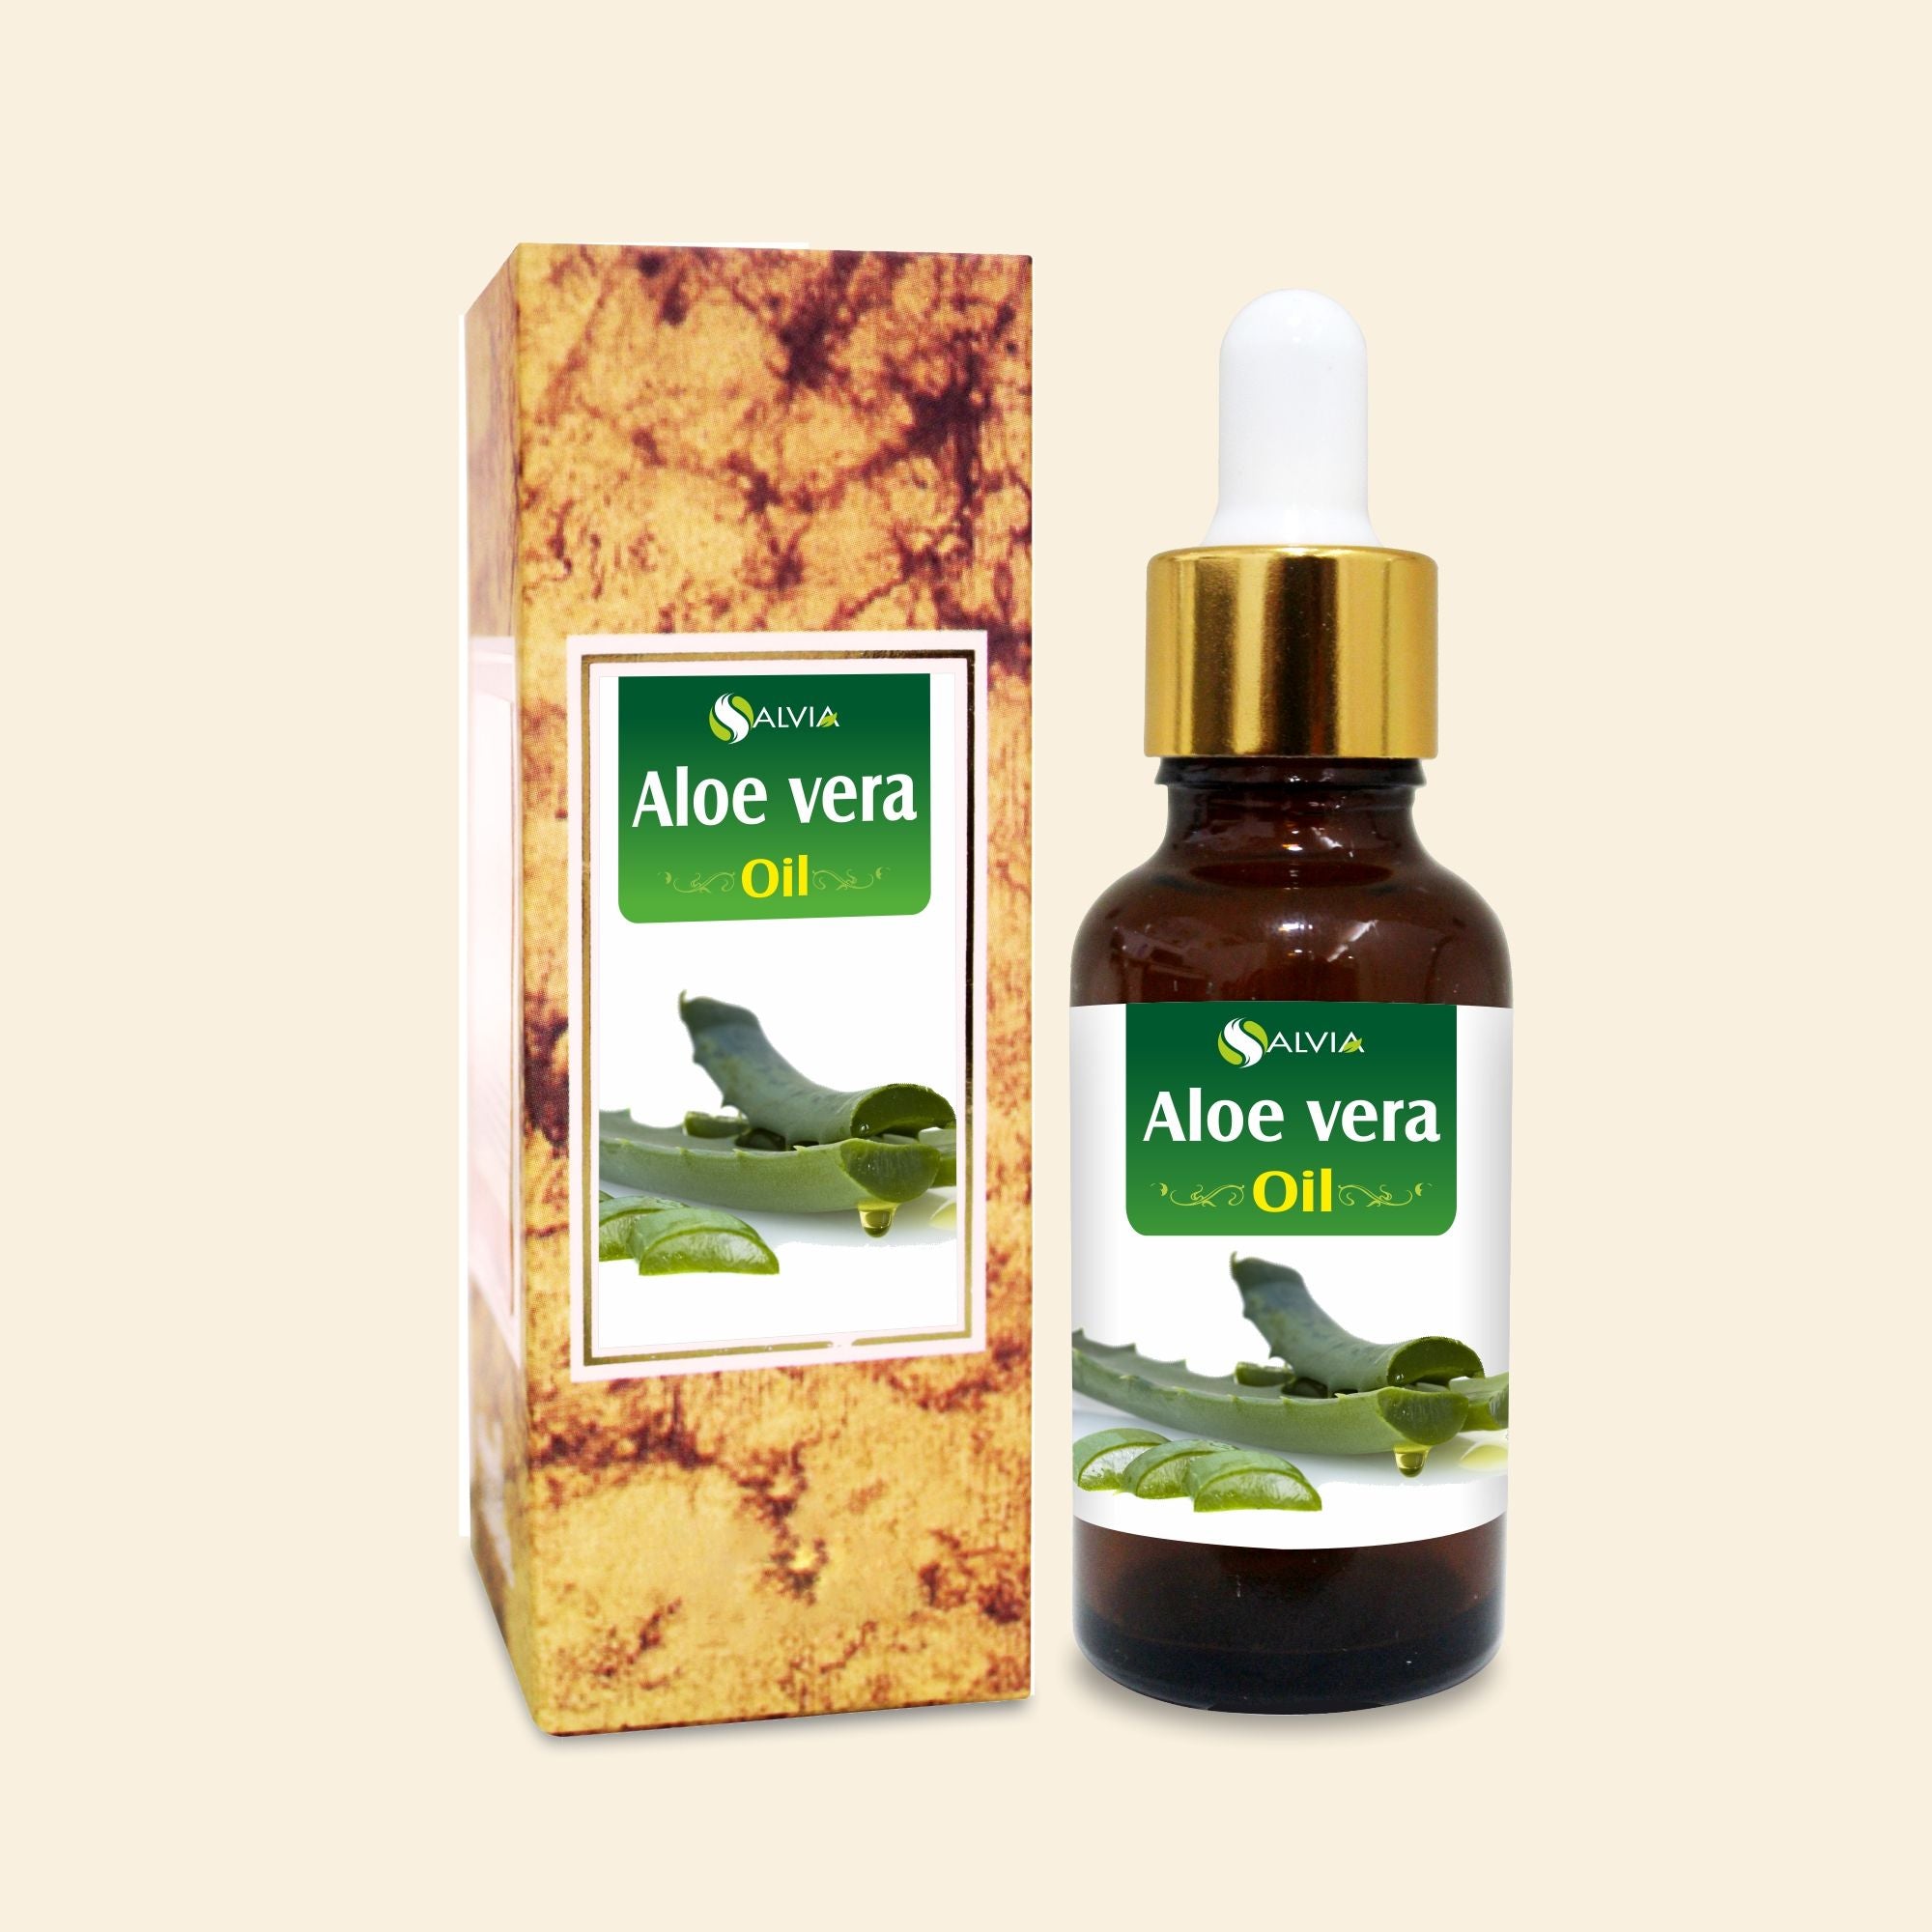 Salvia Natural Carrier Oils Aloe Vera Oil (Aloe Barbadensis) 100% Pure & Natural Carrier Oil